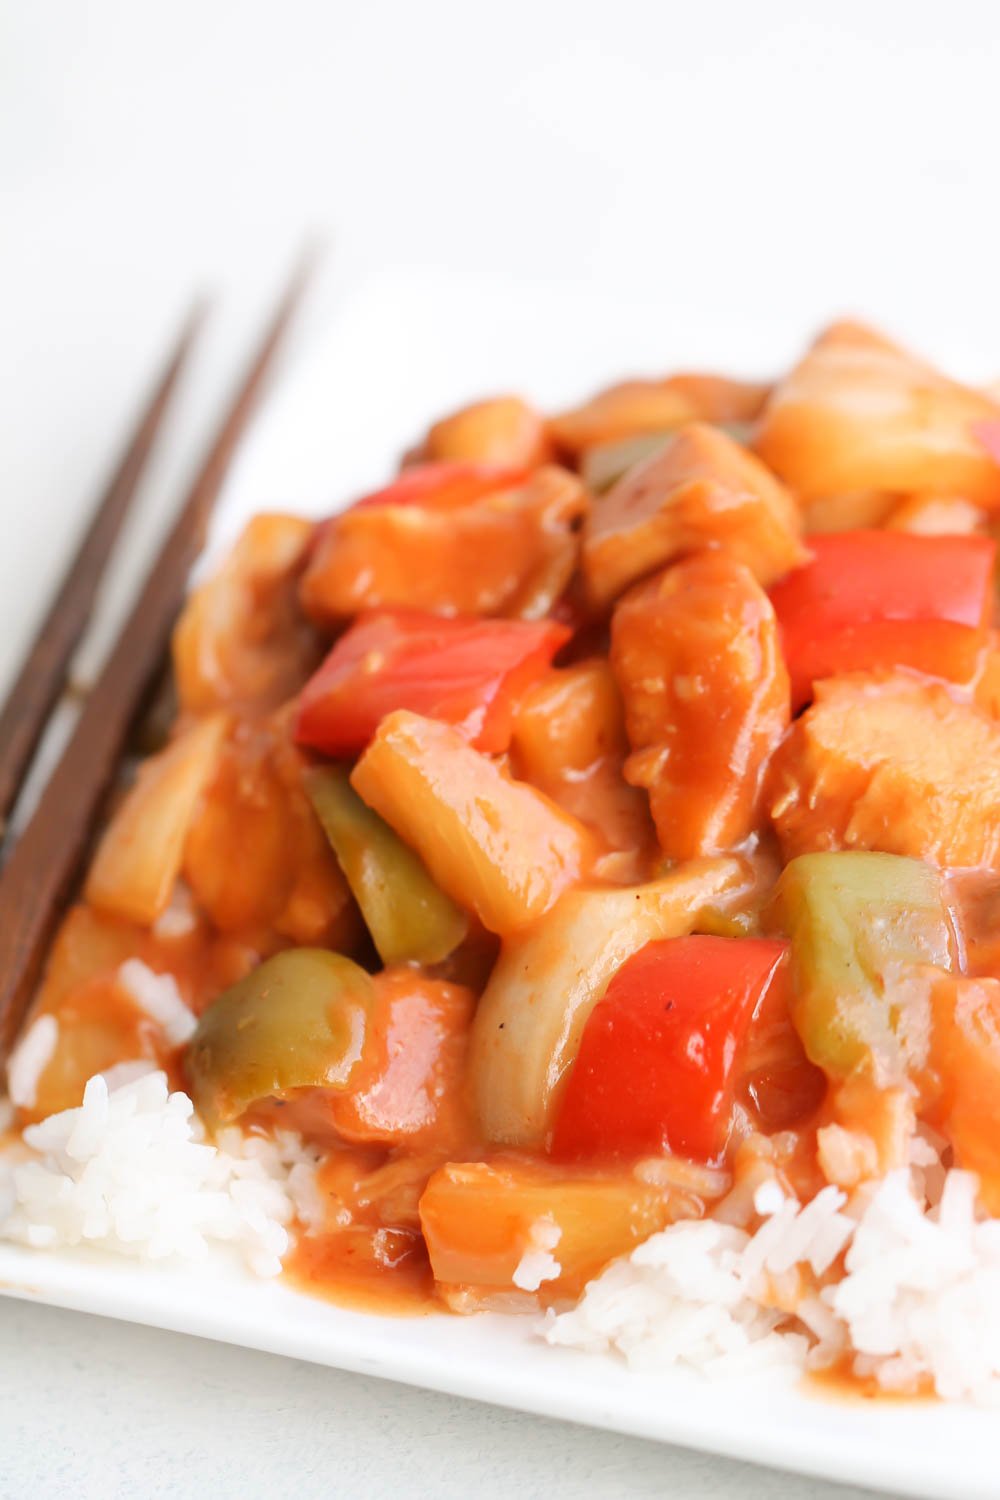 Slow Cooker Sweet and Sour Chicken Recipe